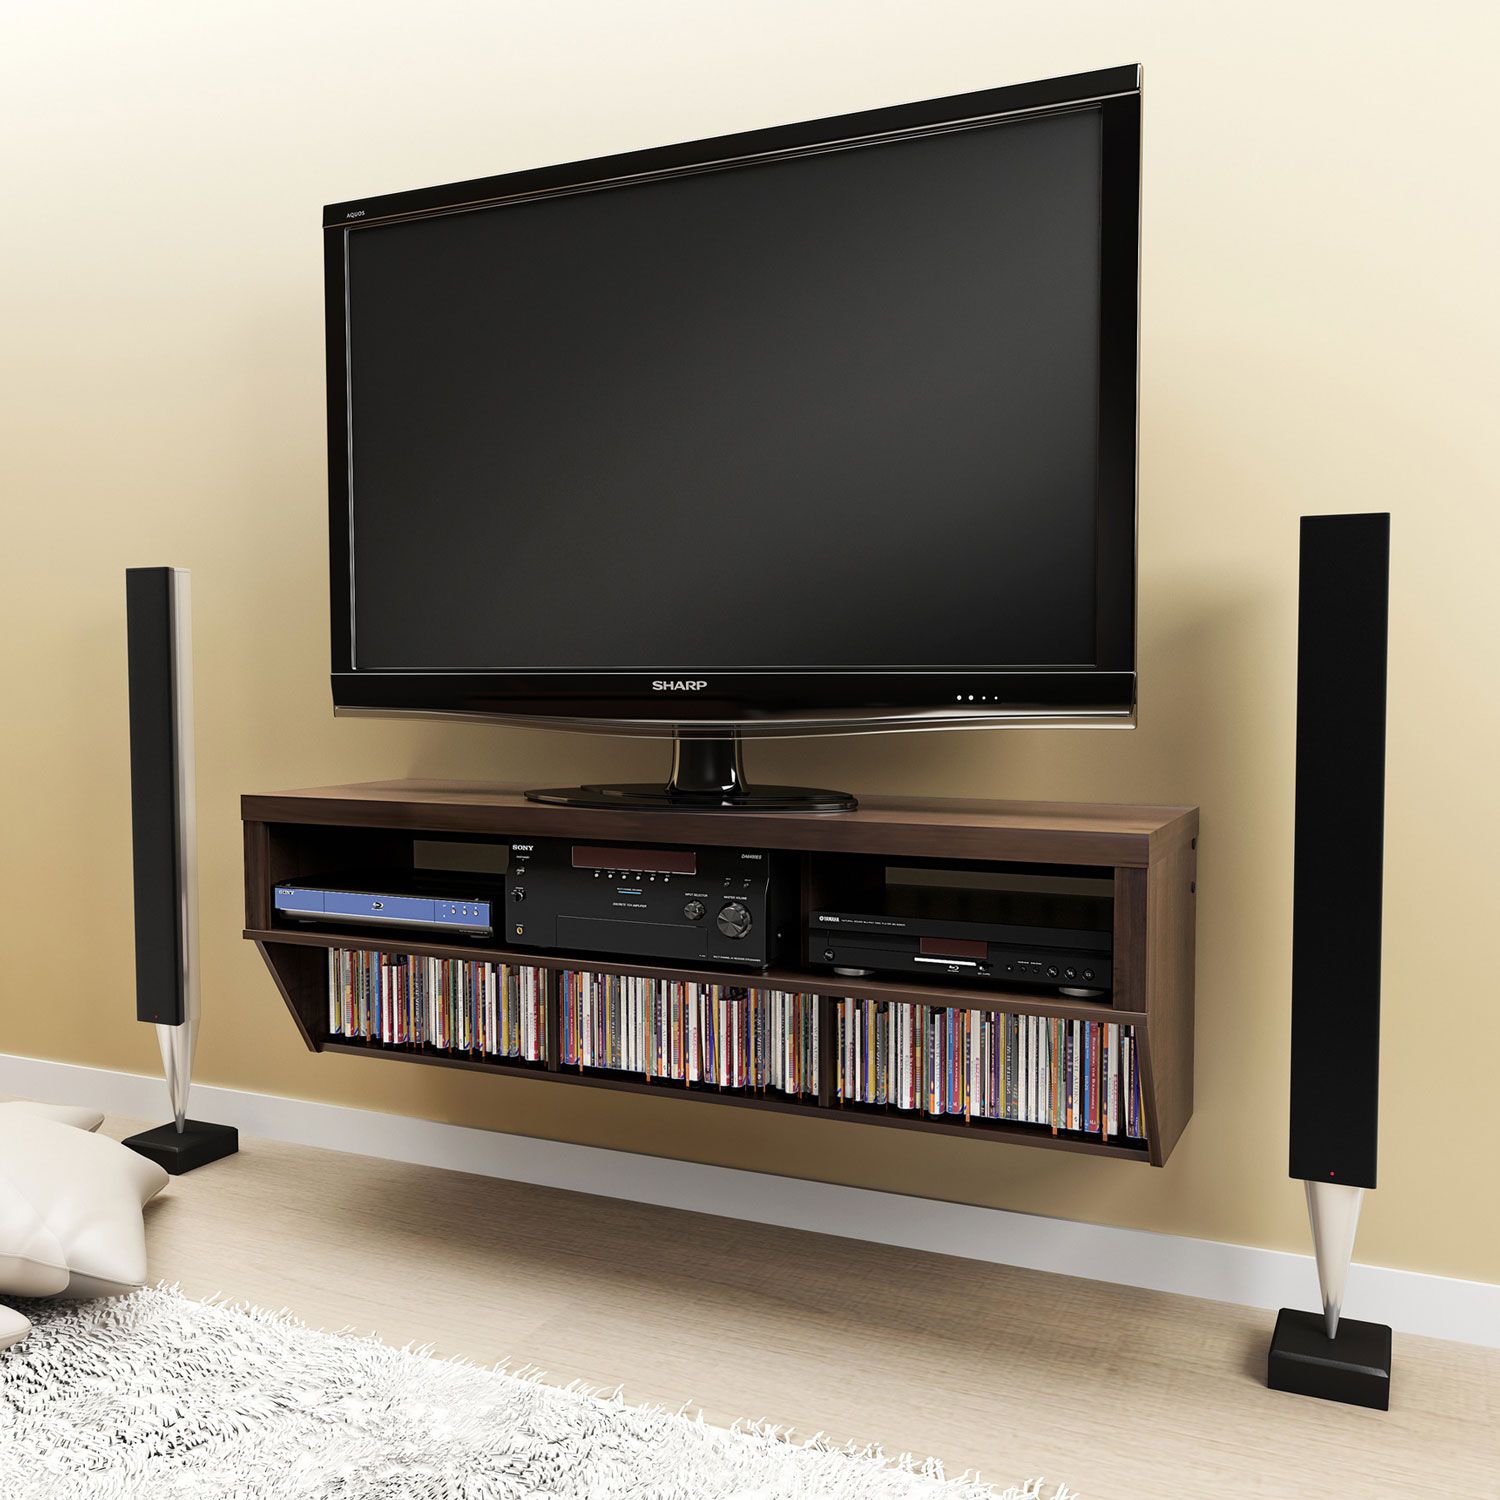 Cool Flat Screen Tv Stands With Mount | Homesfeed Pertaining To Stand For Flat Screen (Gallery 19 of 20)